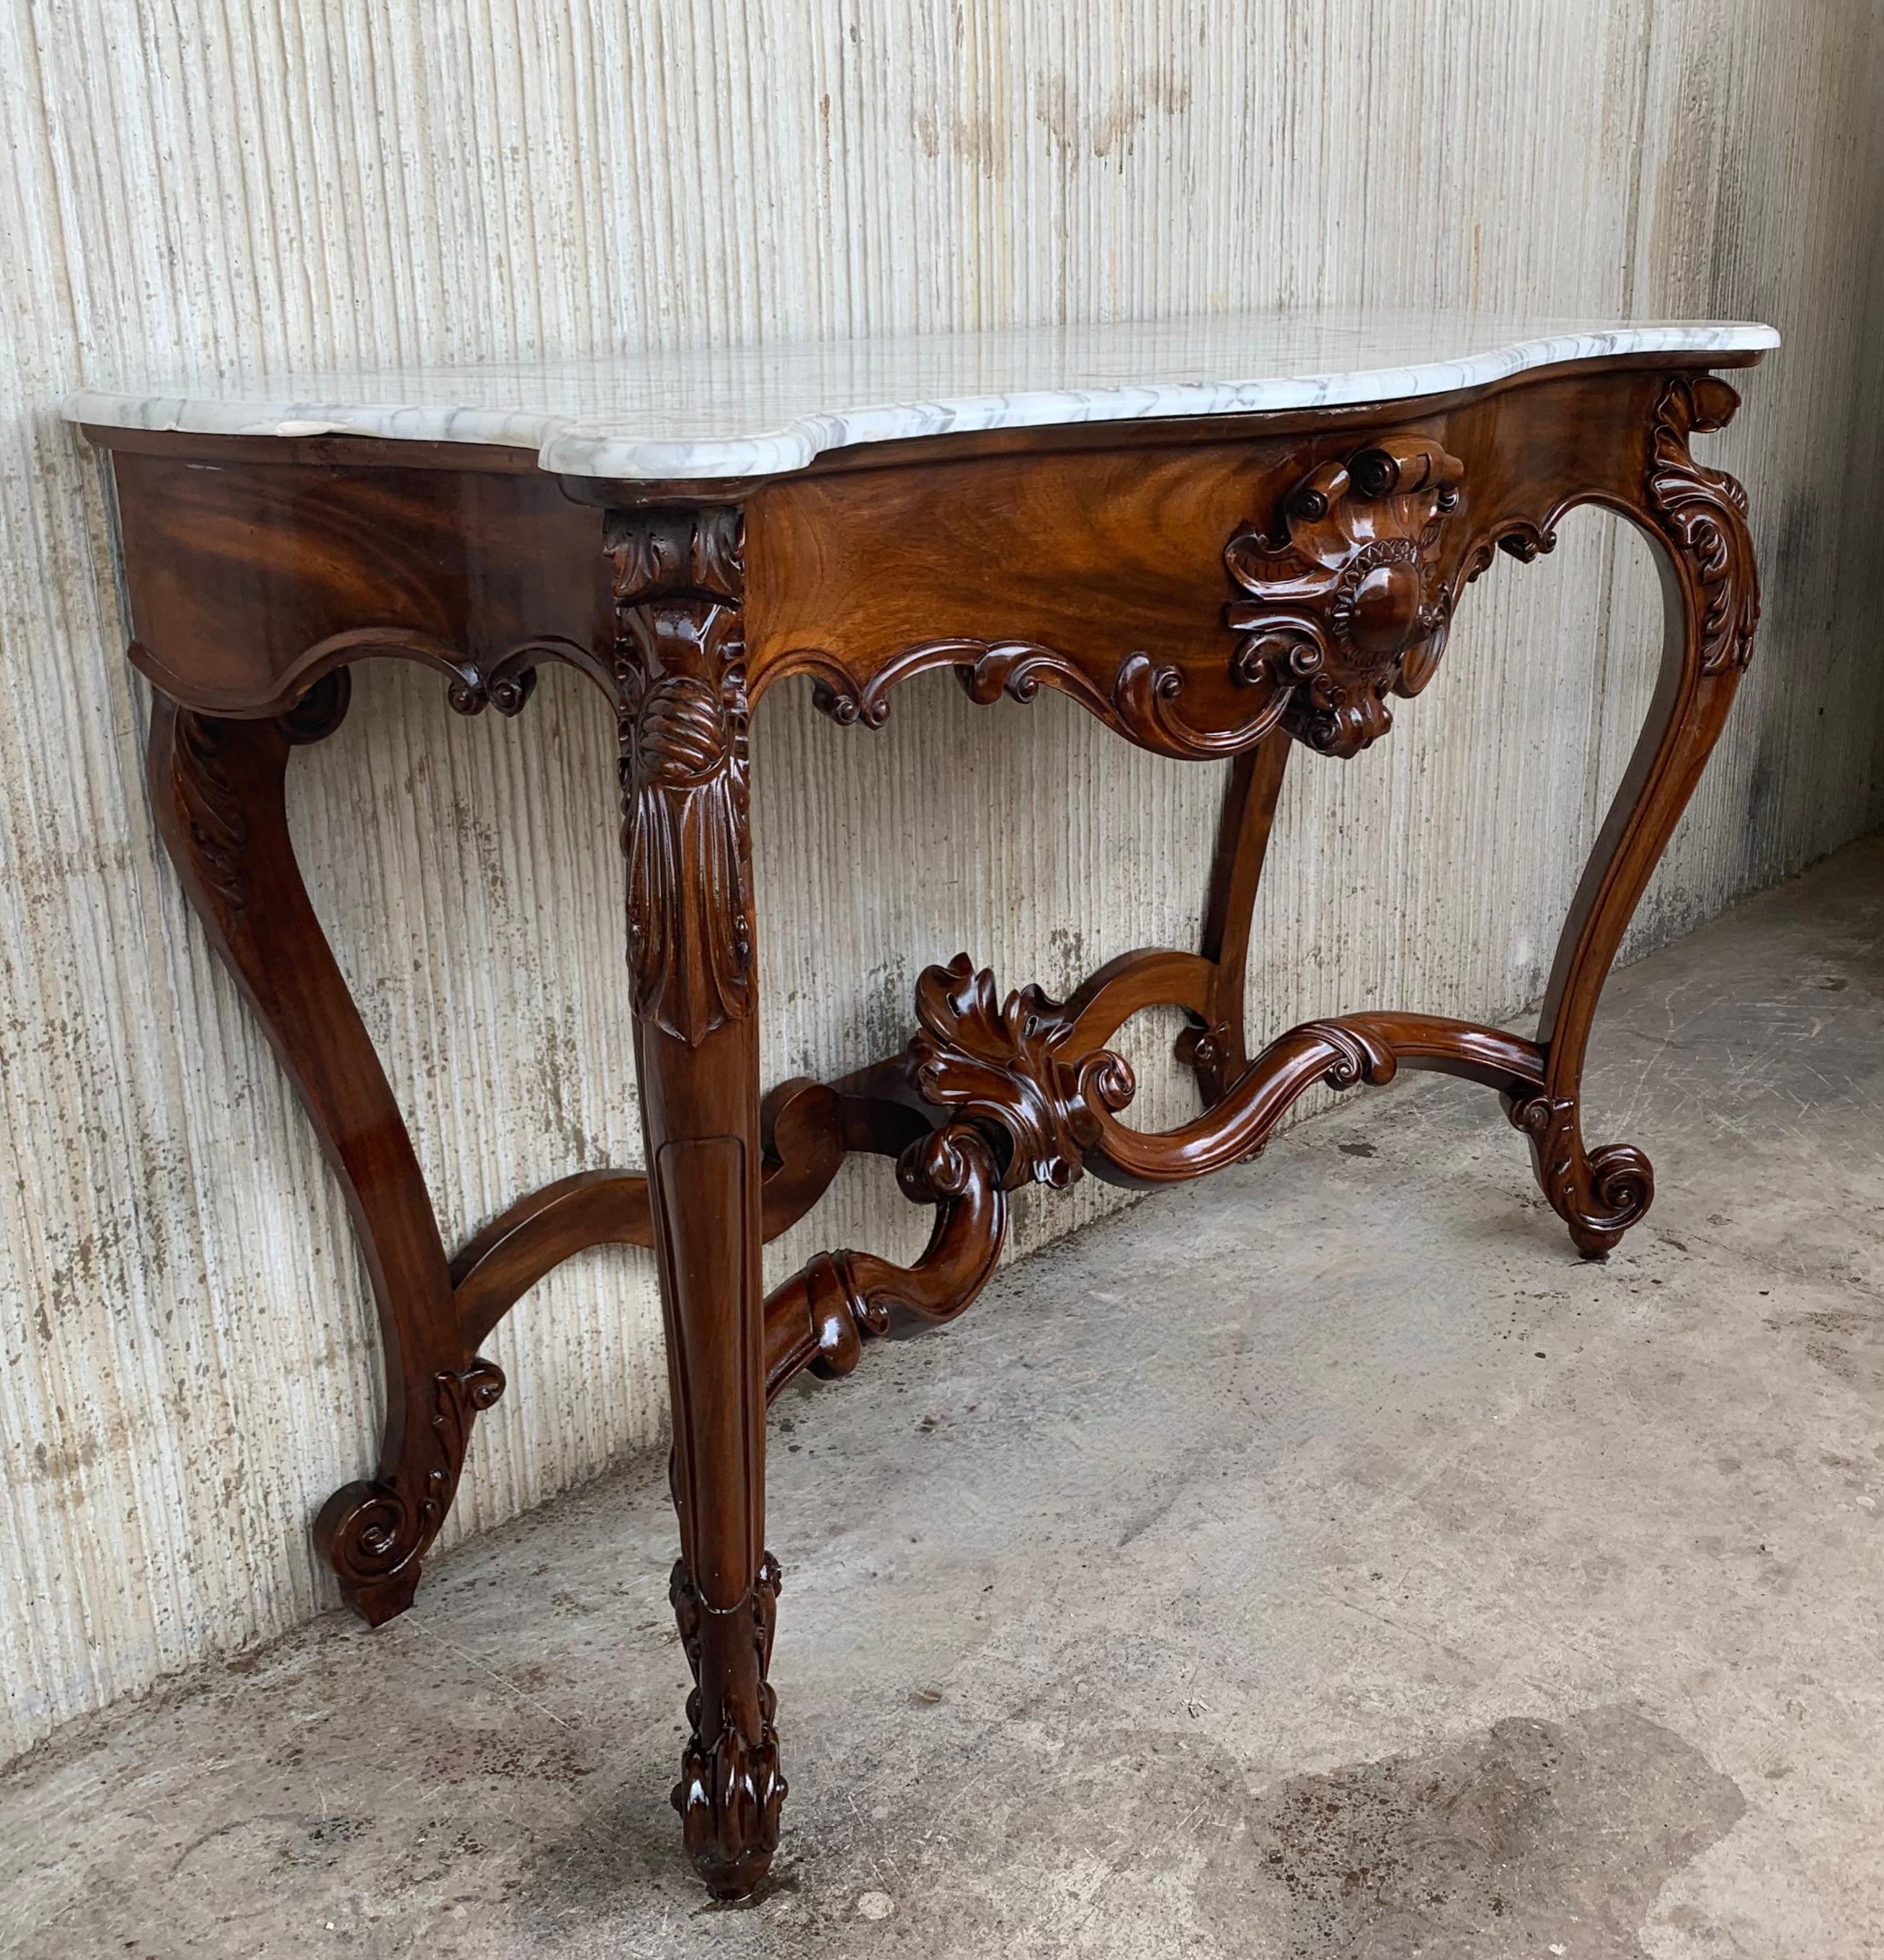 Large French Regency Carved Walnut Console Table with White Marble Top '2 Avai' For Sale 4